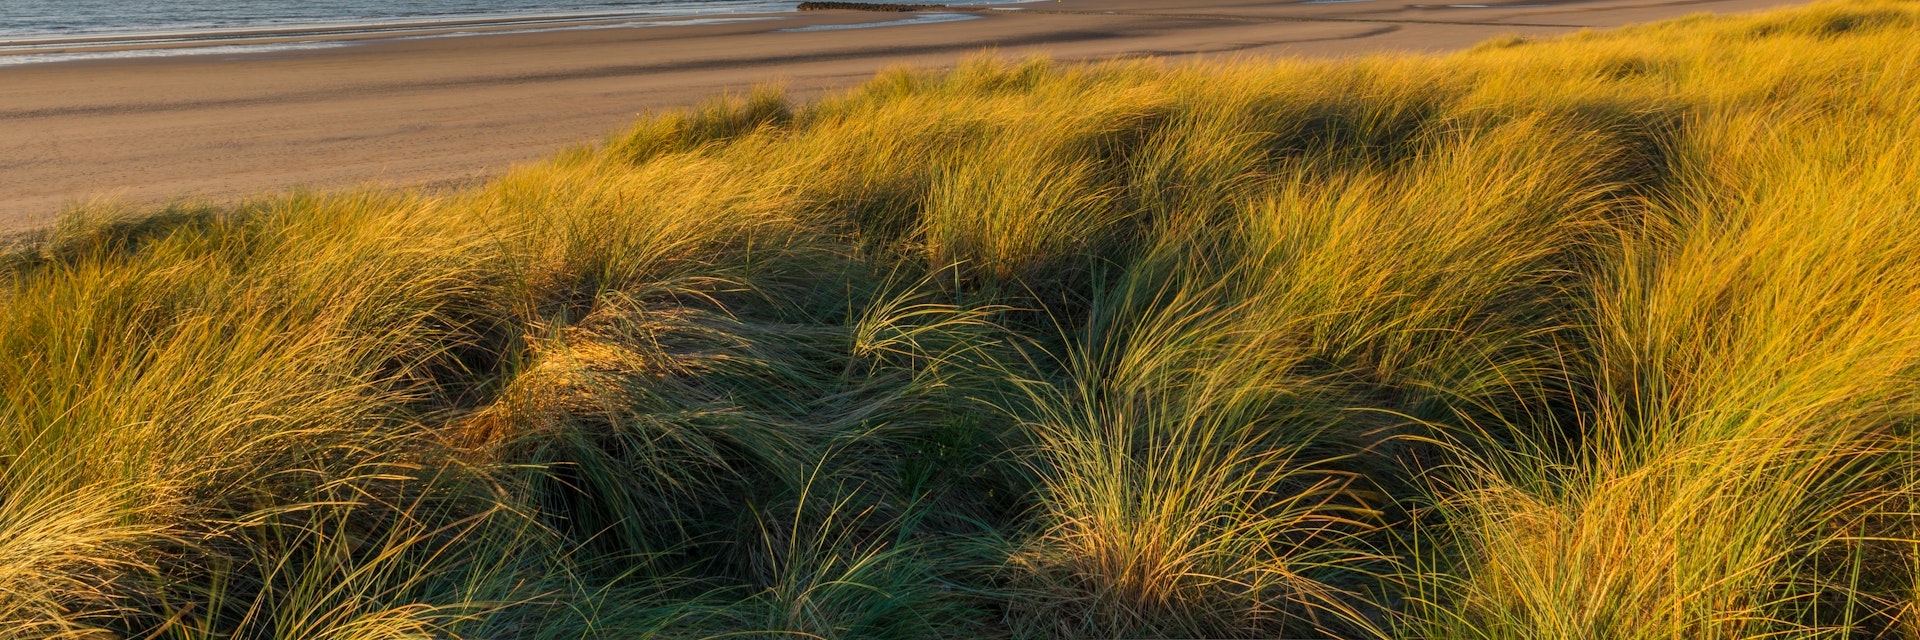 Long exposure photograph of sand dunes in the city of Ostend during sunset with a view over the North Sea, Belgium.